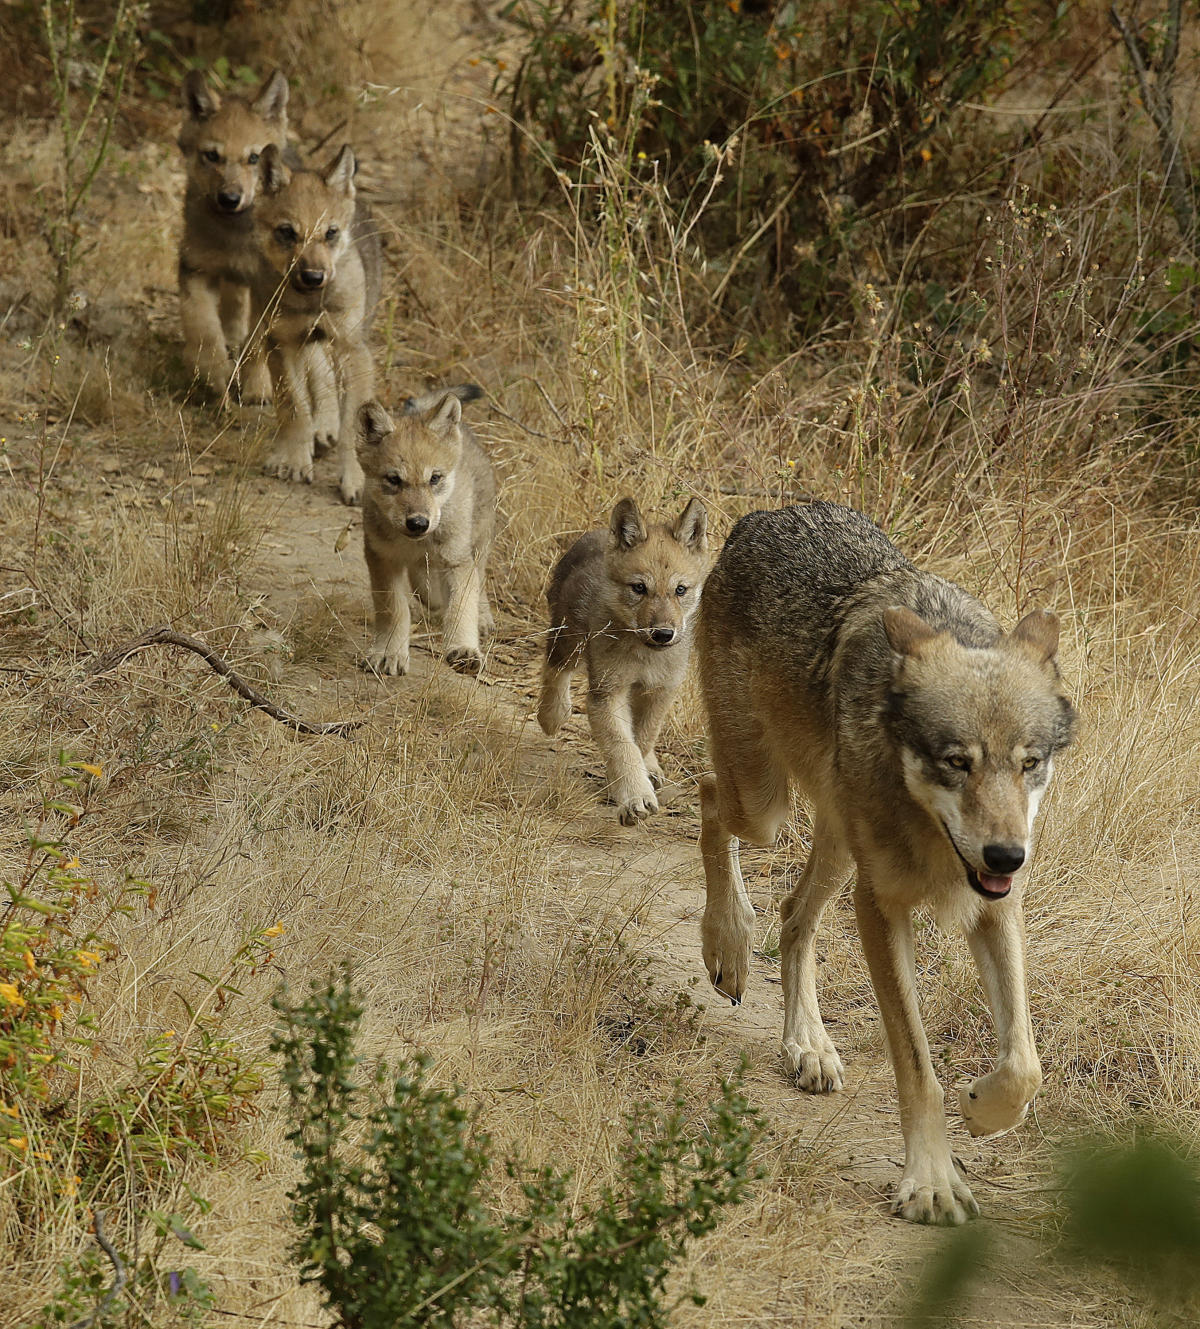 #Researchers have identified a new pack of endangered gray wolves in California